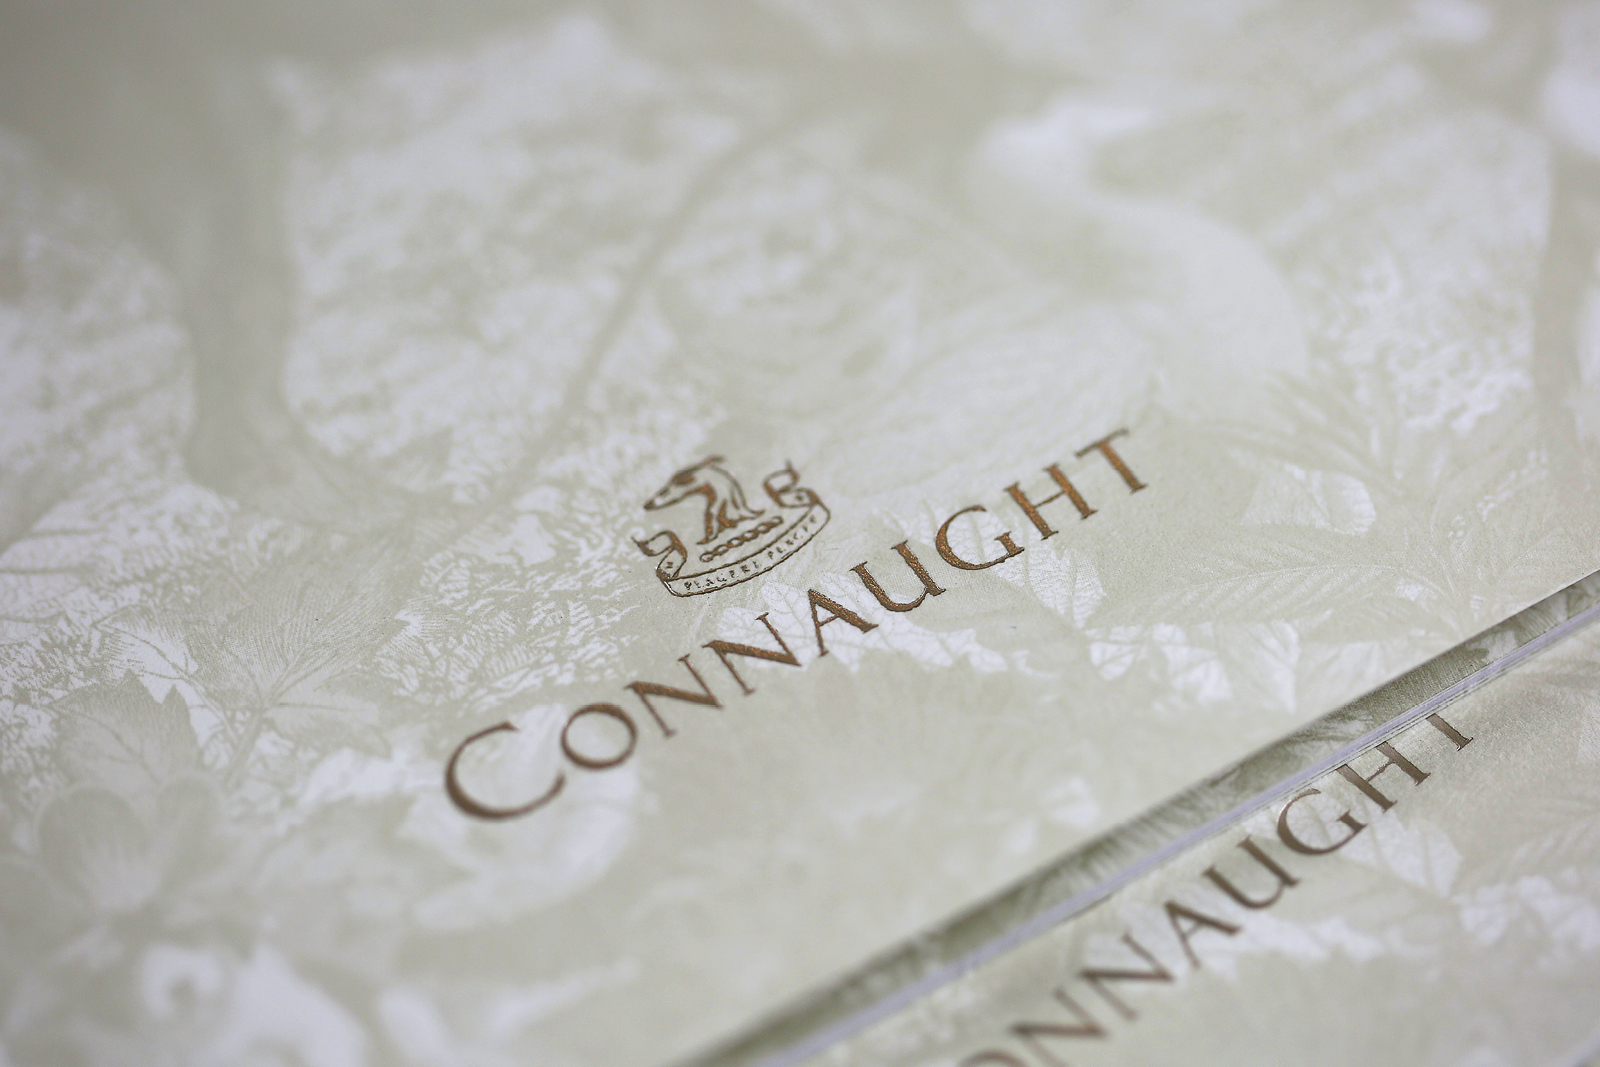 The Connaught Suites Brochure